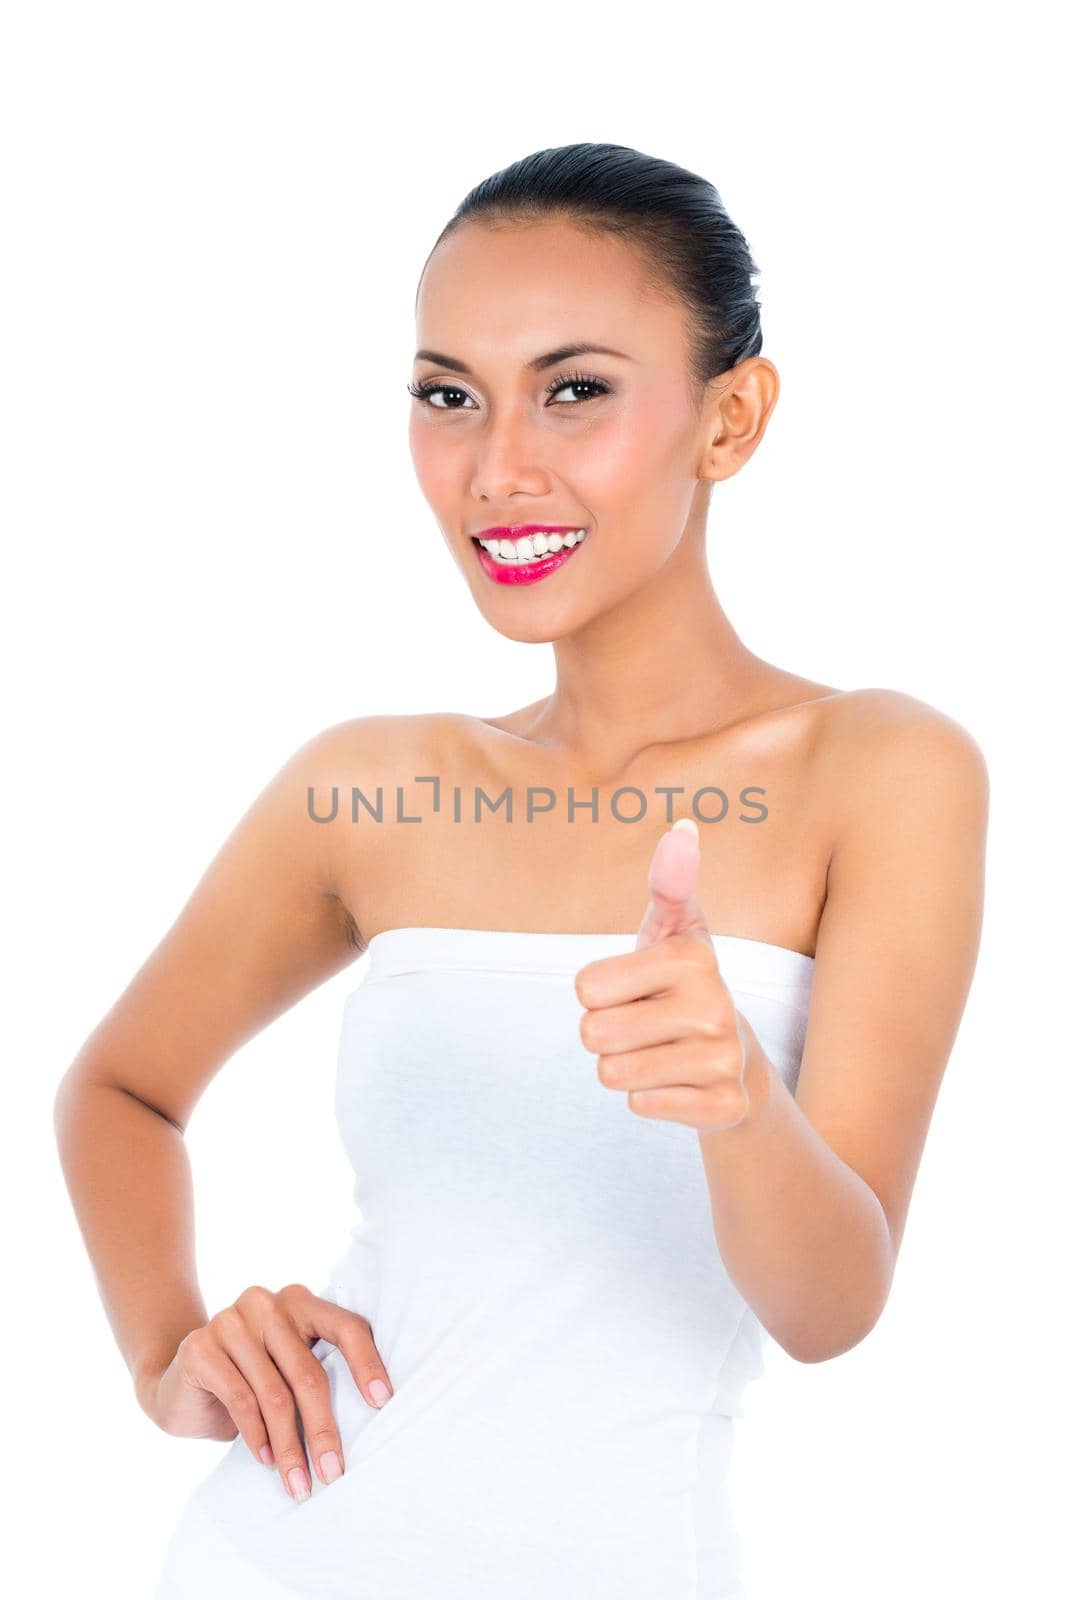 Smiling young woman gesturing thumbs up over white background